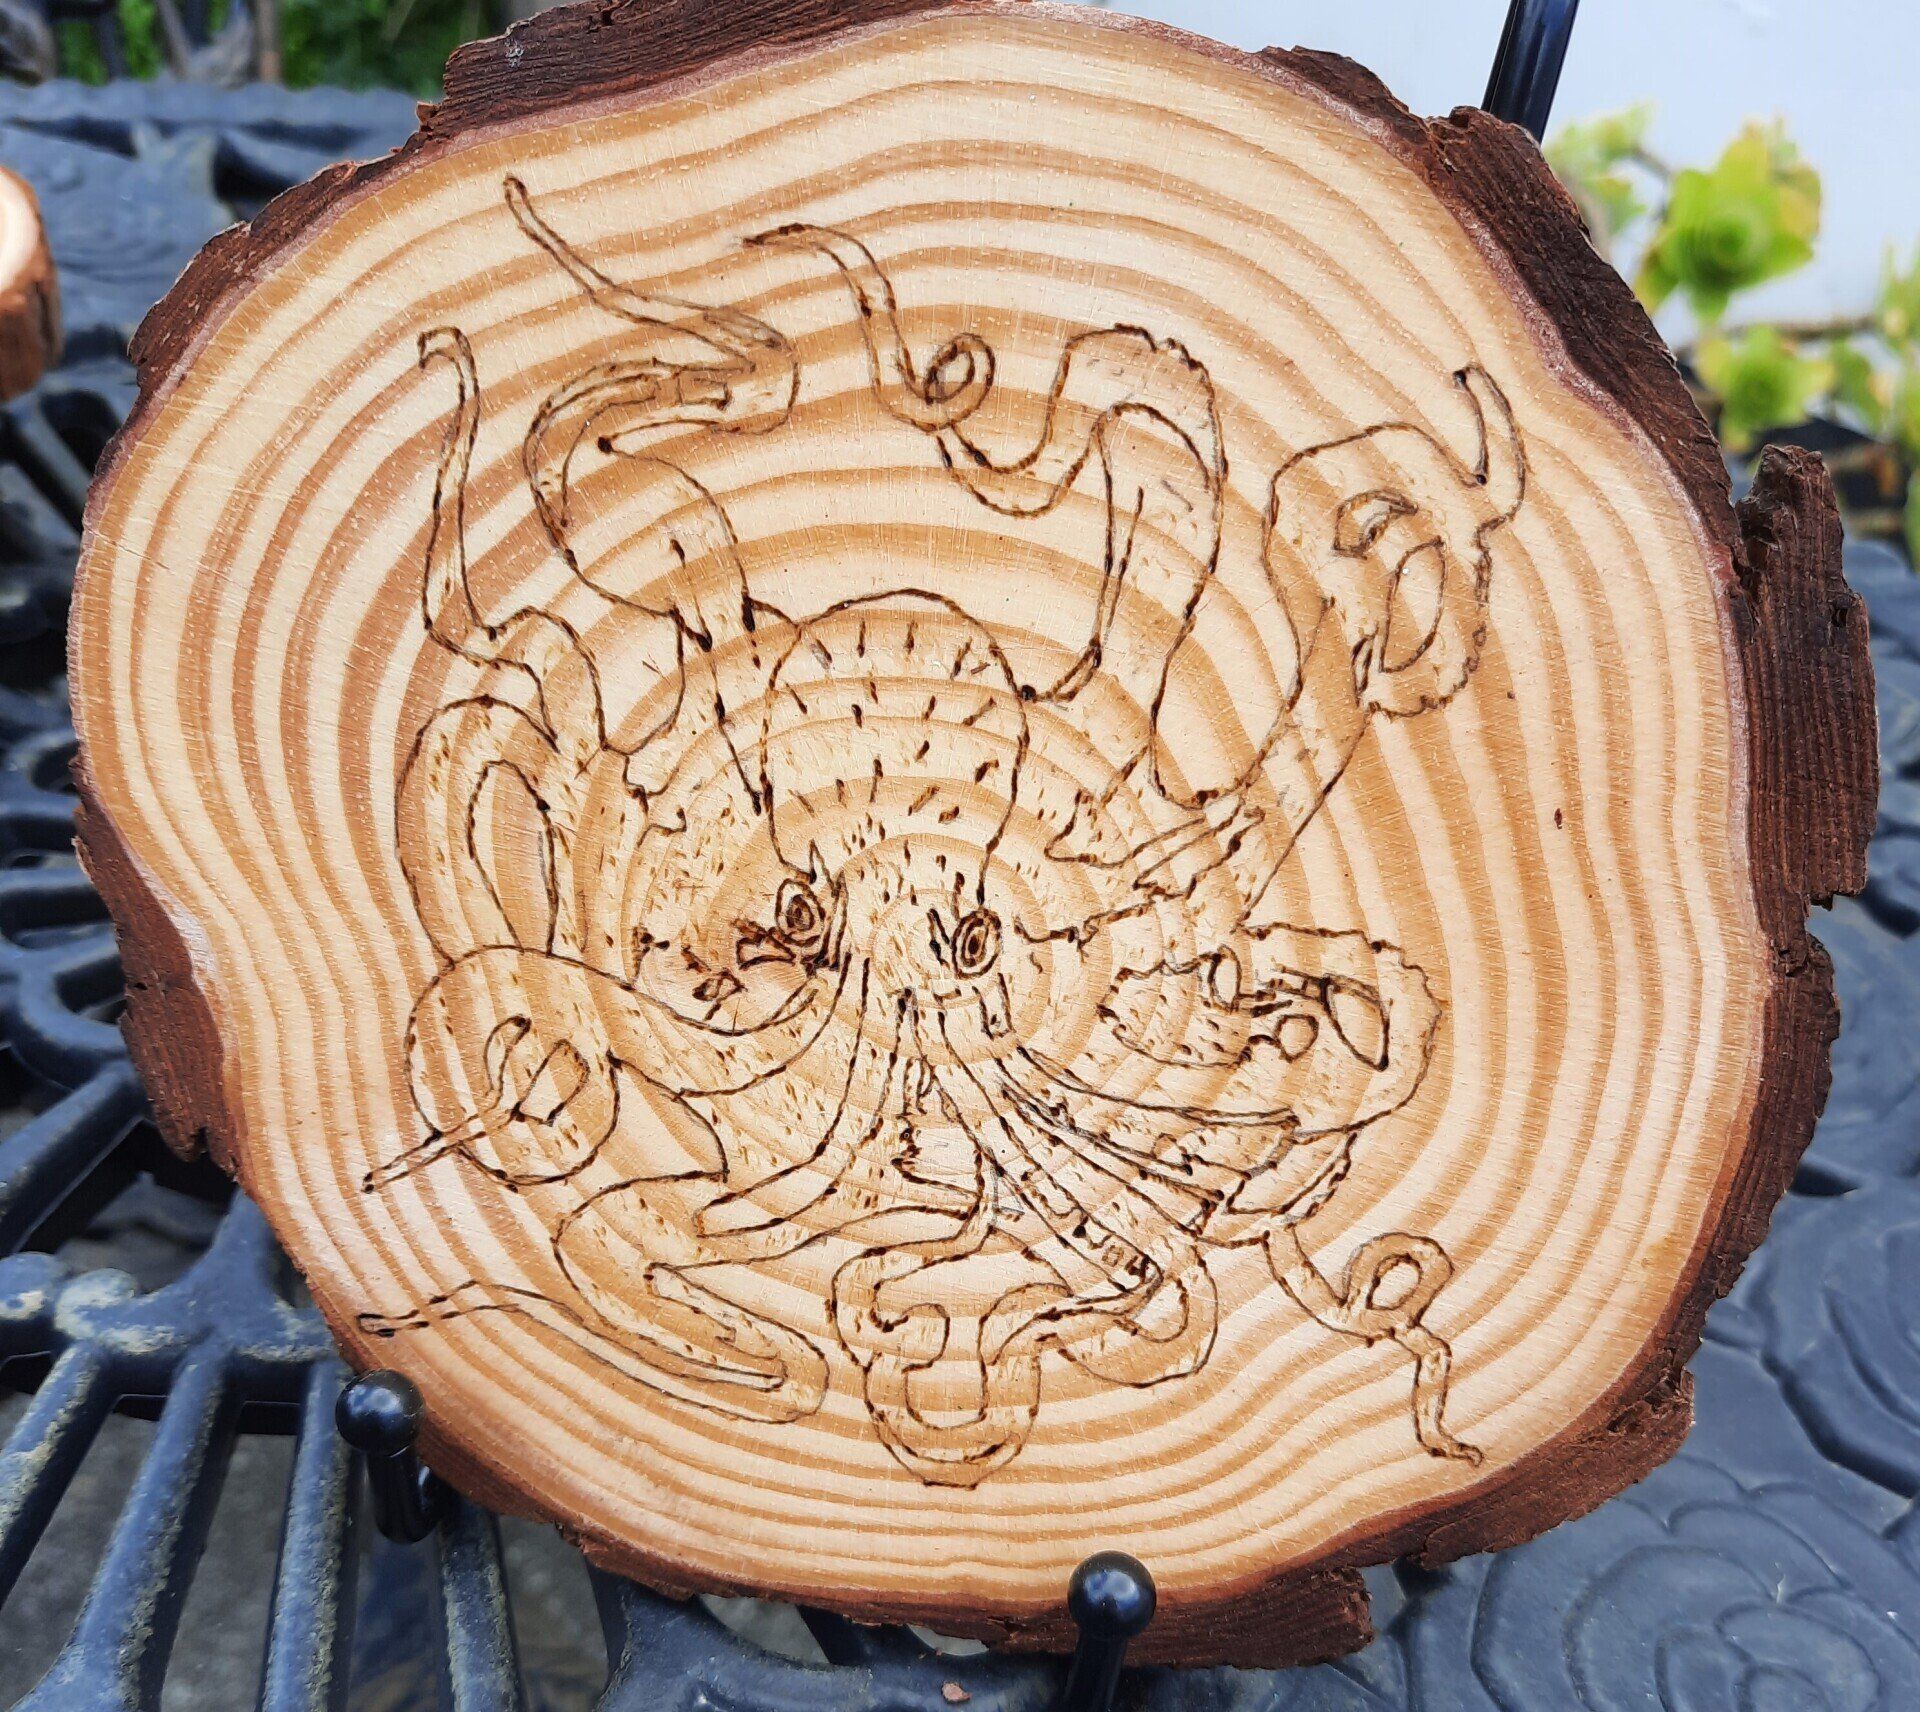 Octopus wood burning coaster by Helen's Pyrography